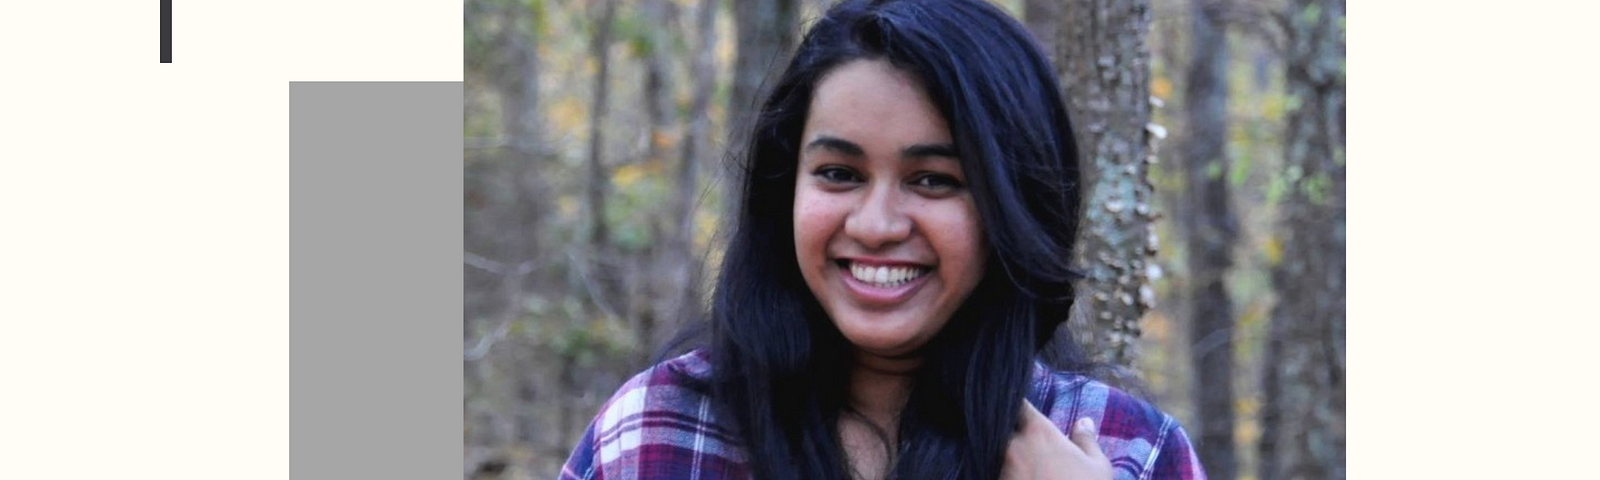 Nandita Gupta wearing a plaid purple shirt, smiling at the camera, with trees behind her.